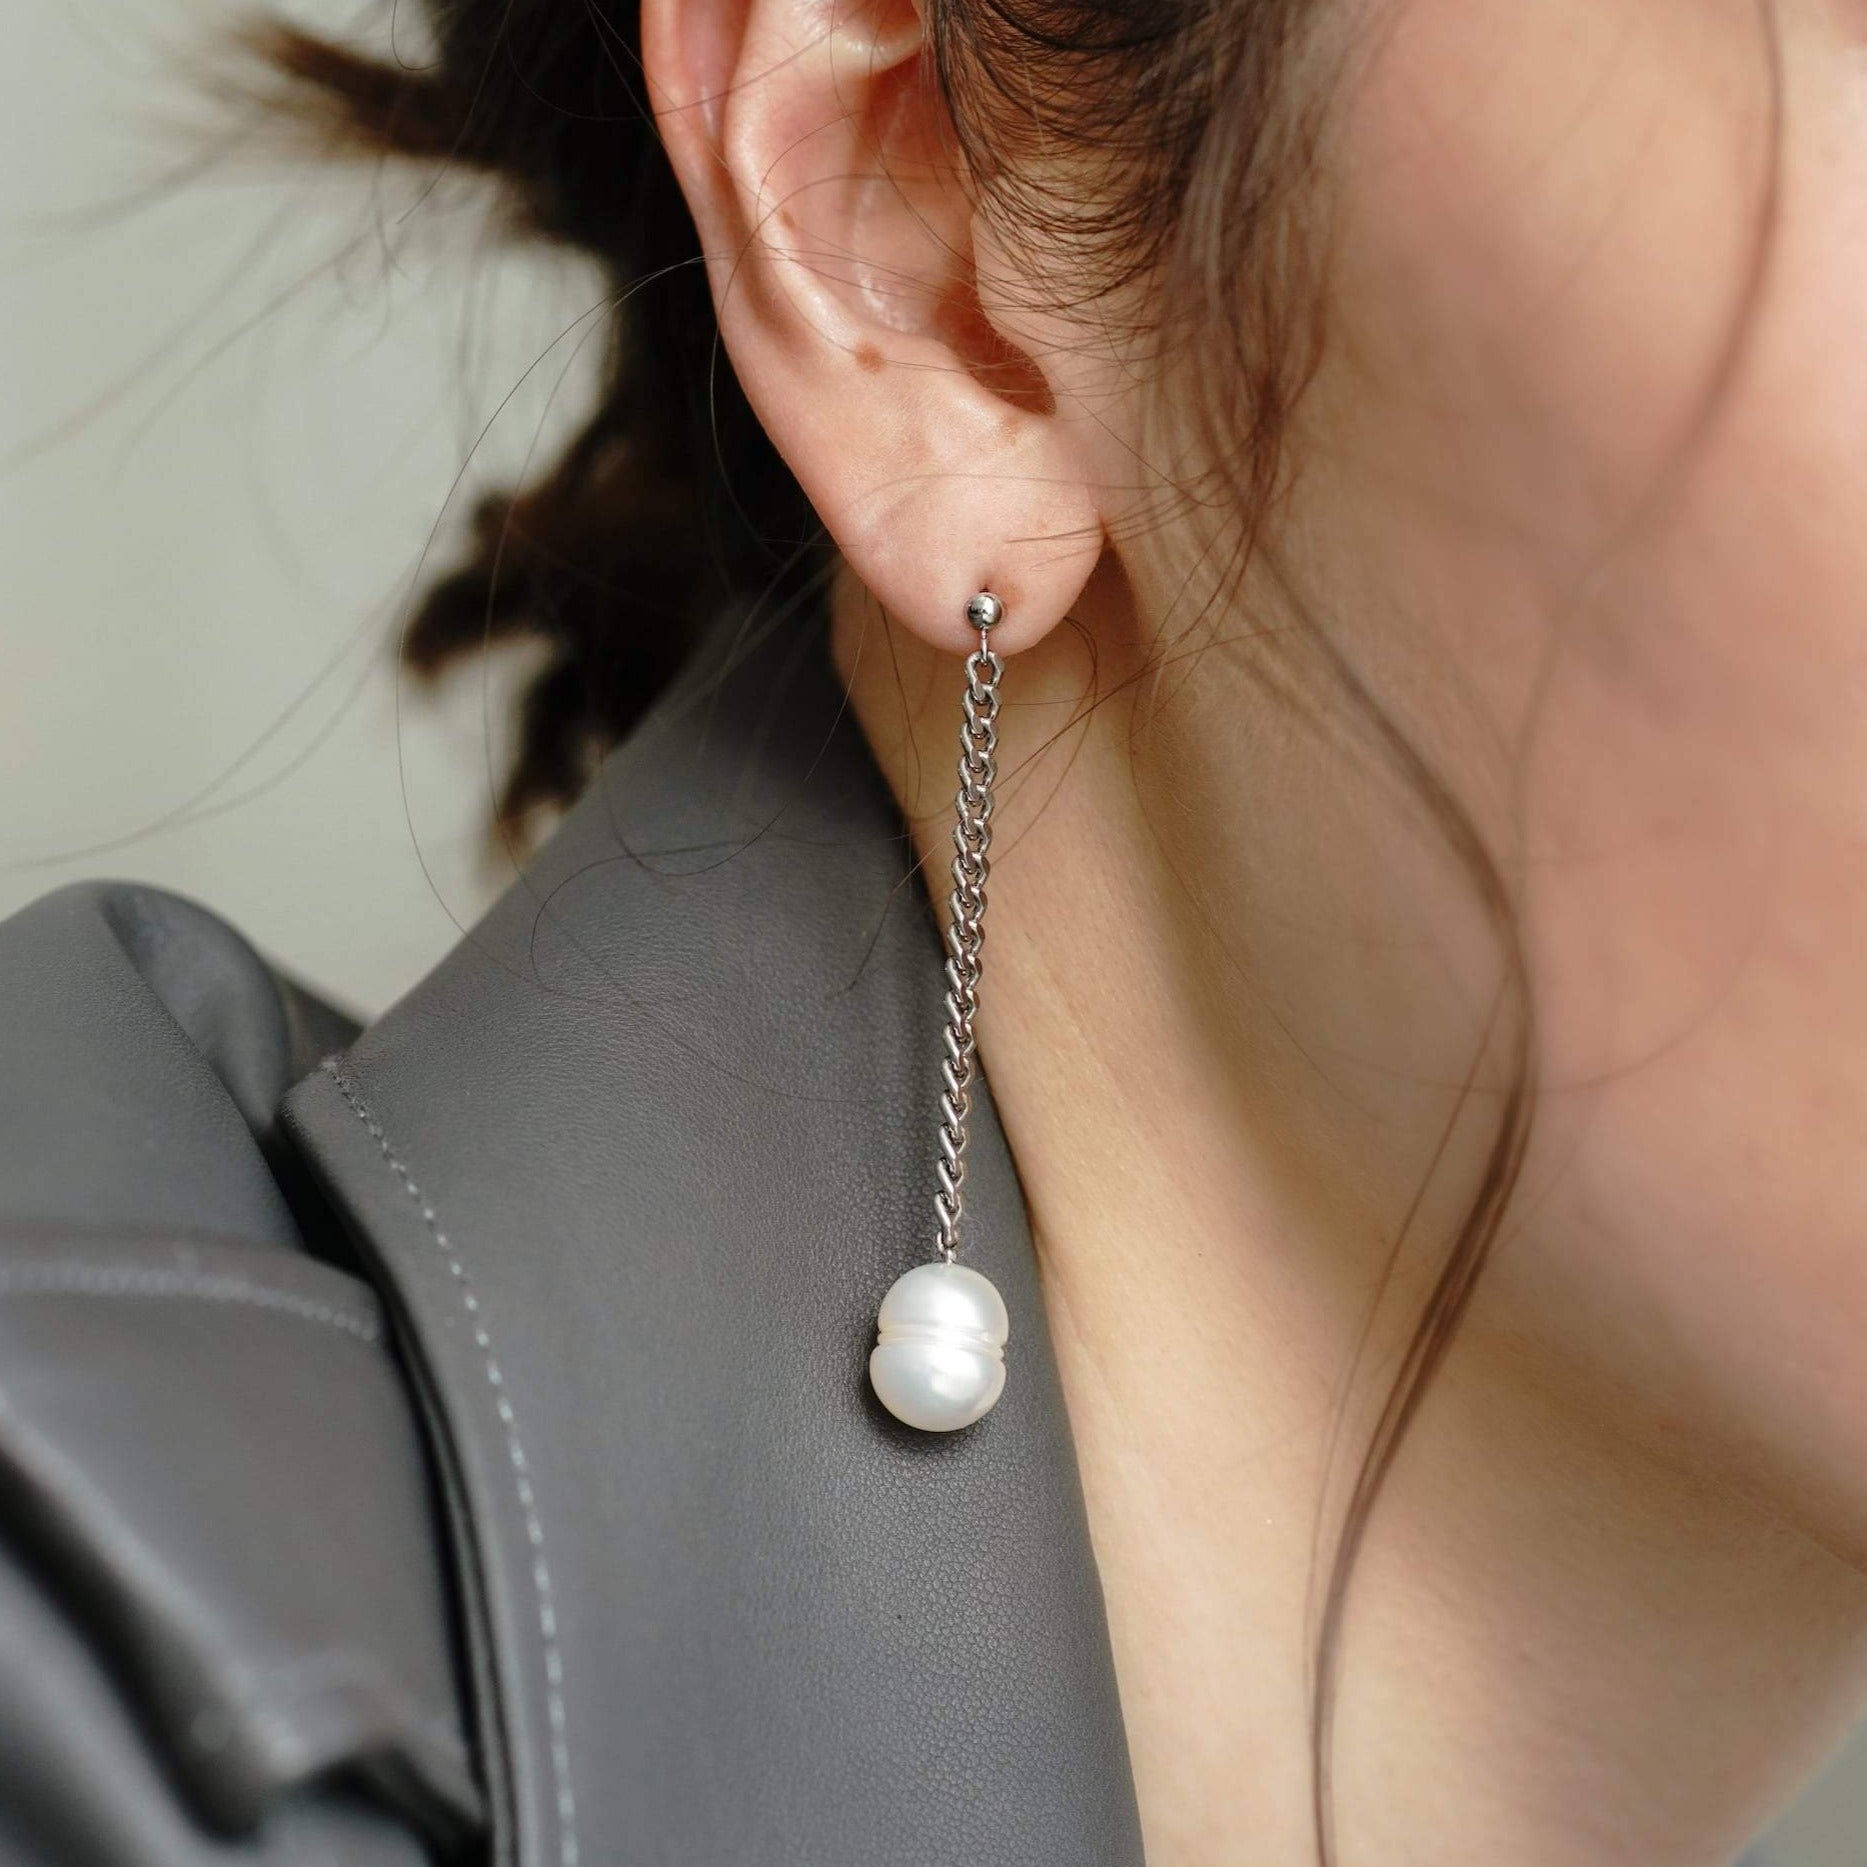 Platinum Chain with Dangling Pearl on Model